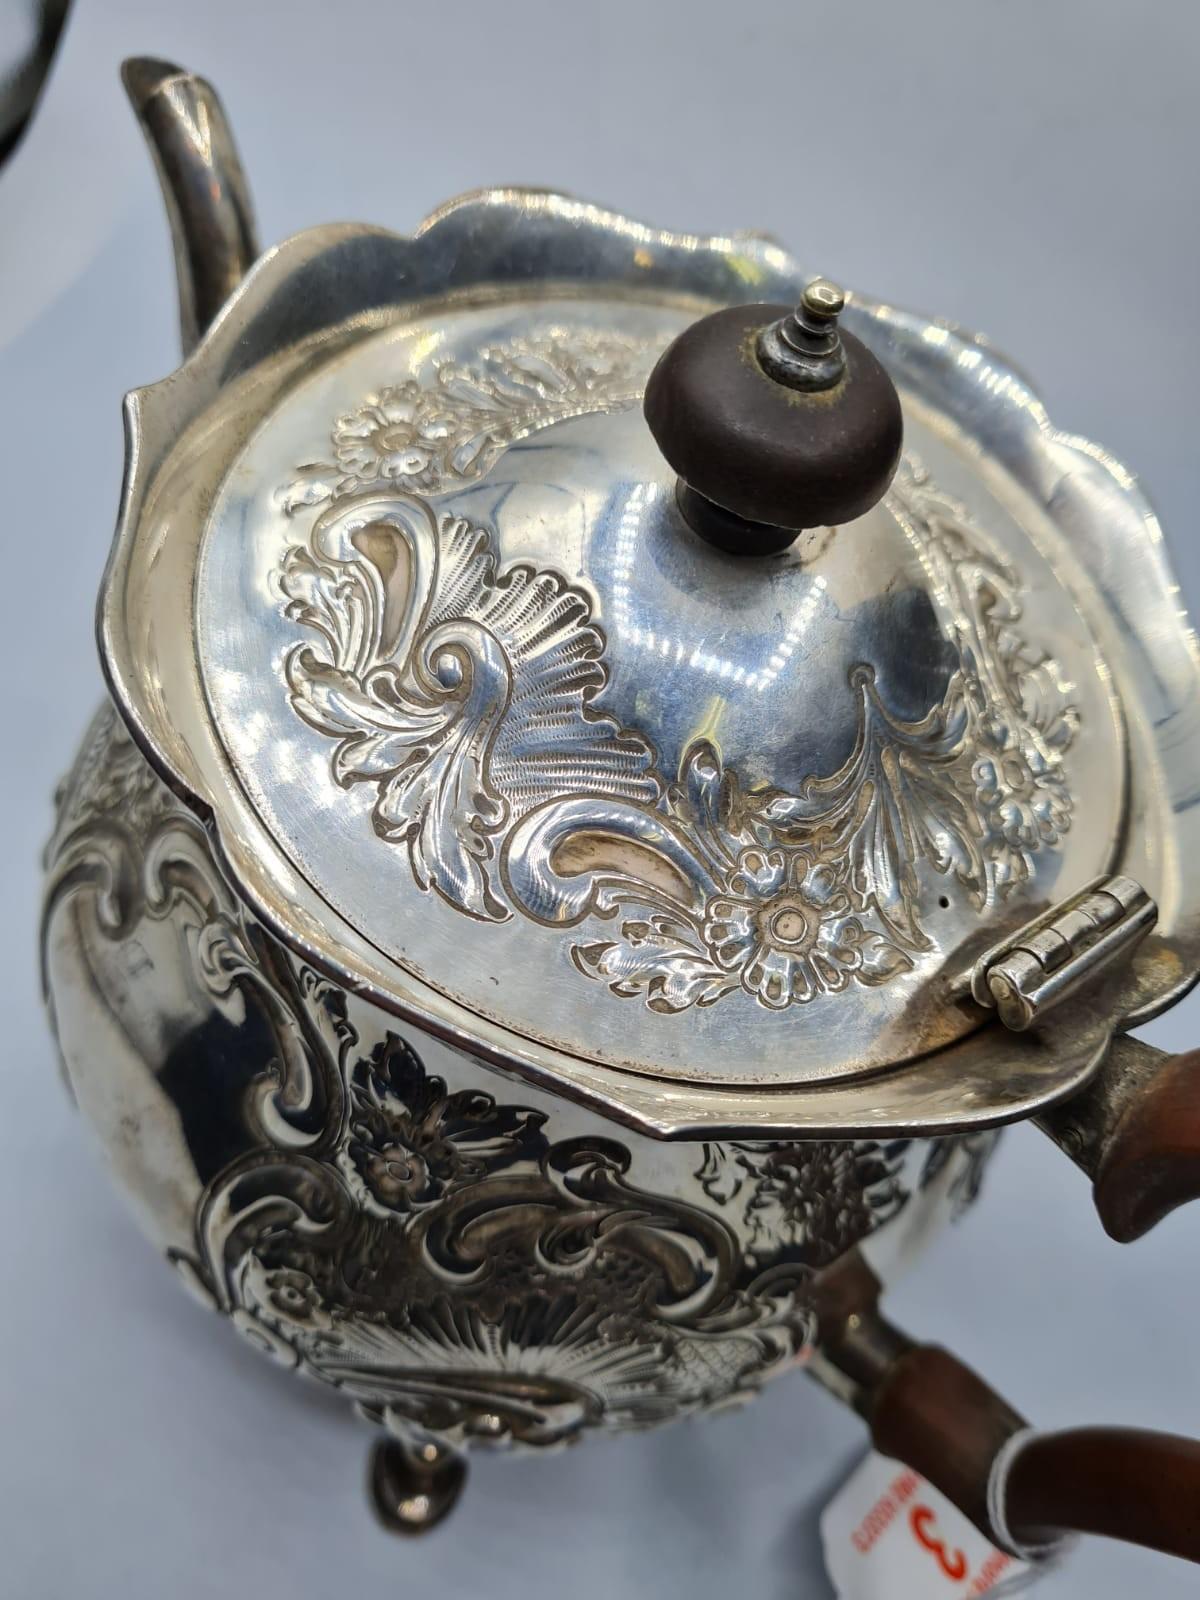 1920 Ornate Silver Teapot 766g - Image 3 of 8